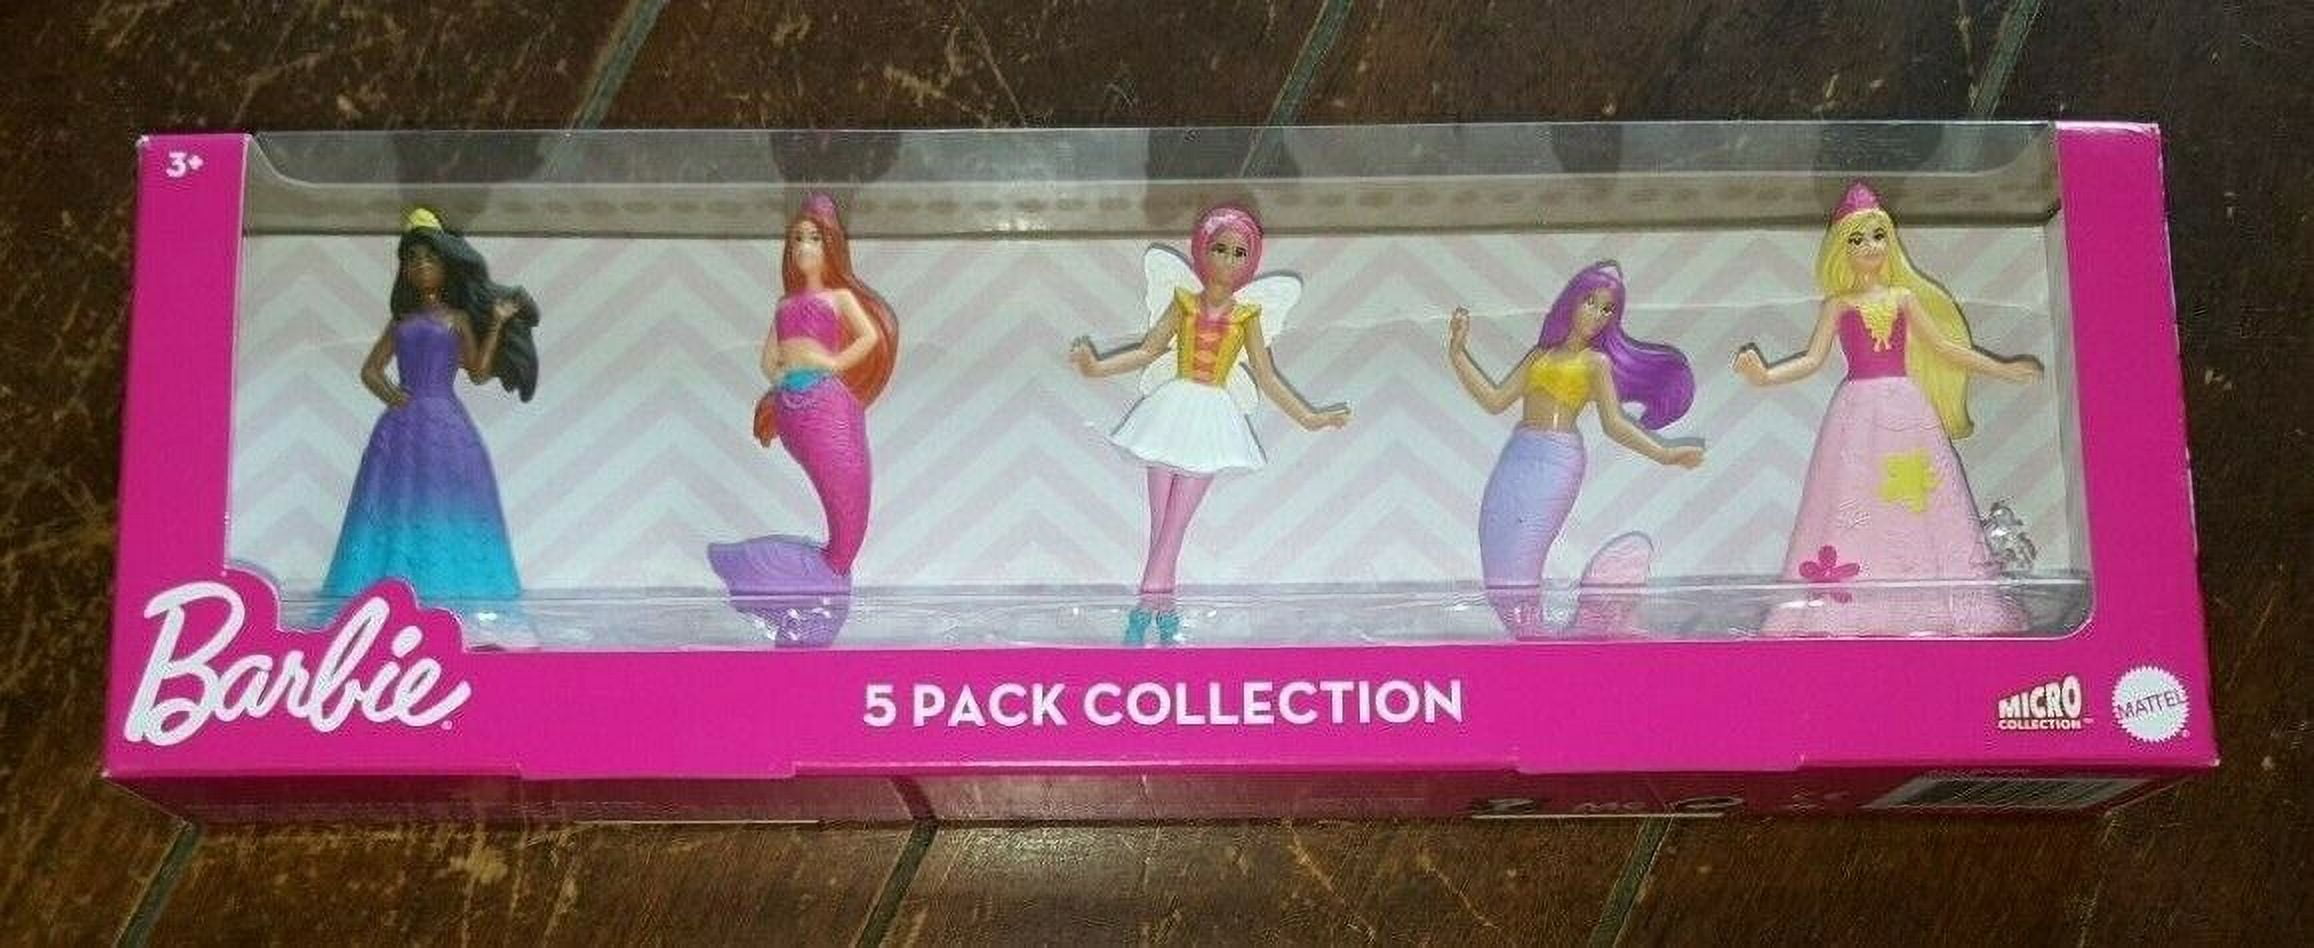 Mattel DI Barbie Micro Collection 5-pack figures